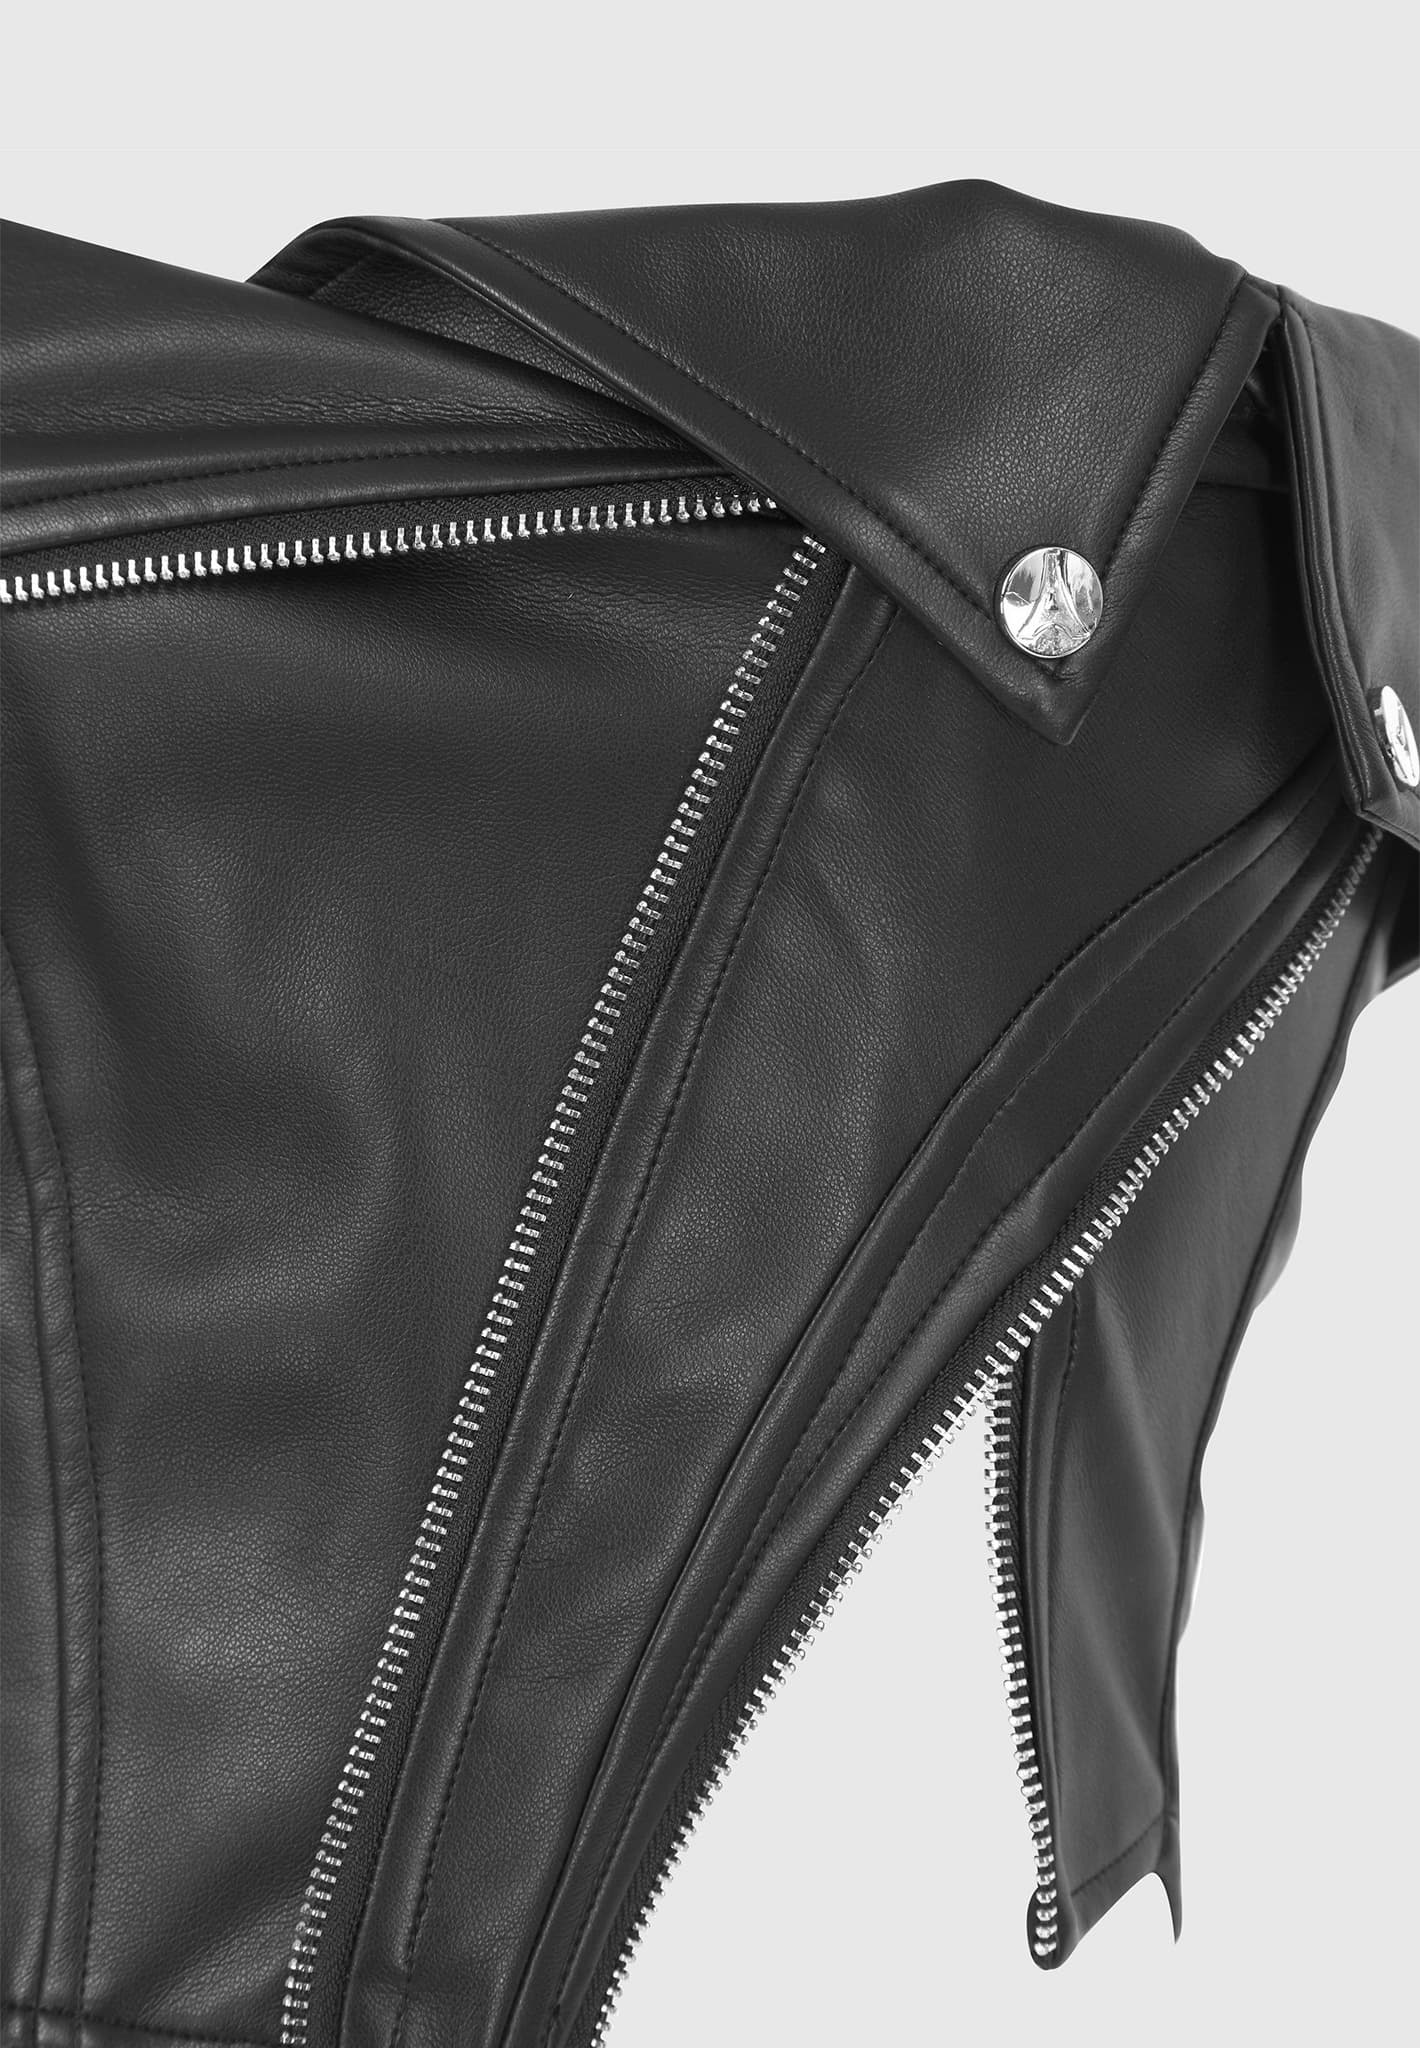 𝔰△n𝒹Ʀ𝒾ηℯ🪽 on X: ▫ Street Style Black leather Corset over a